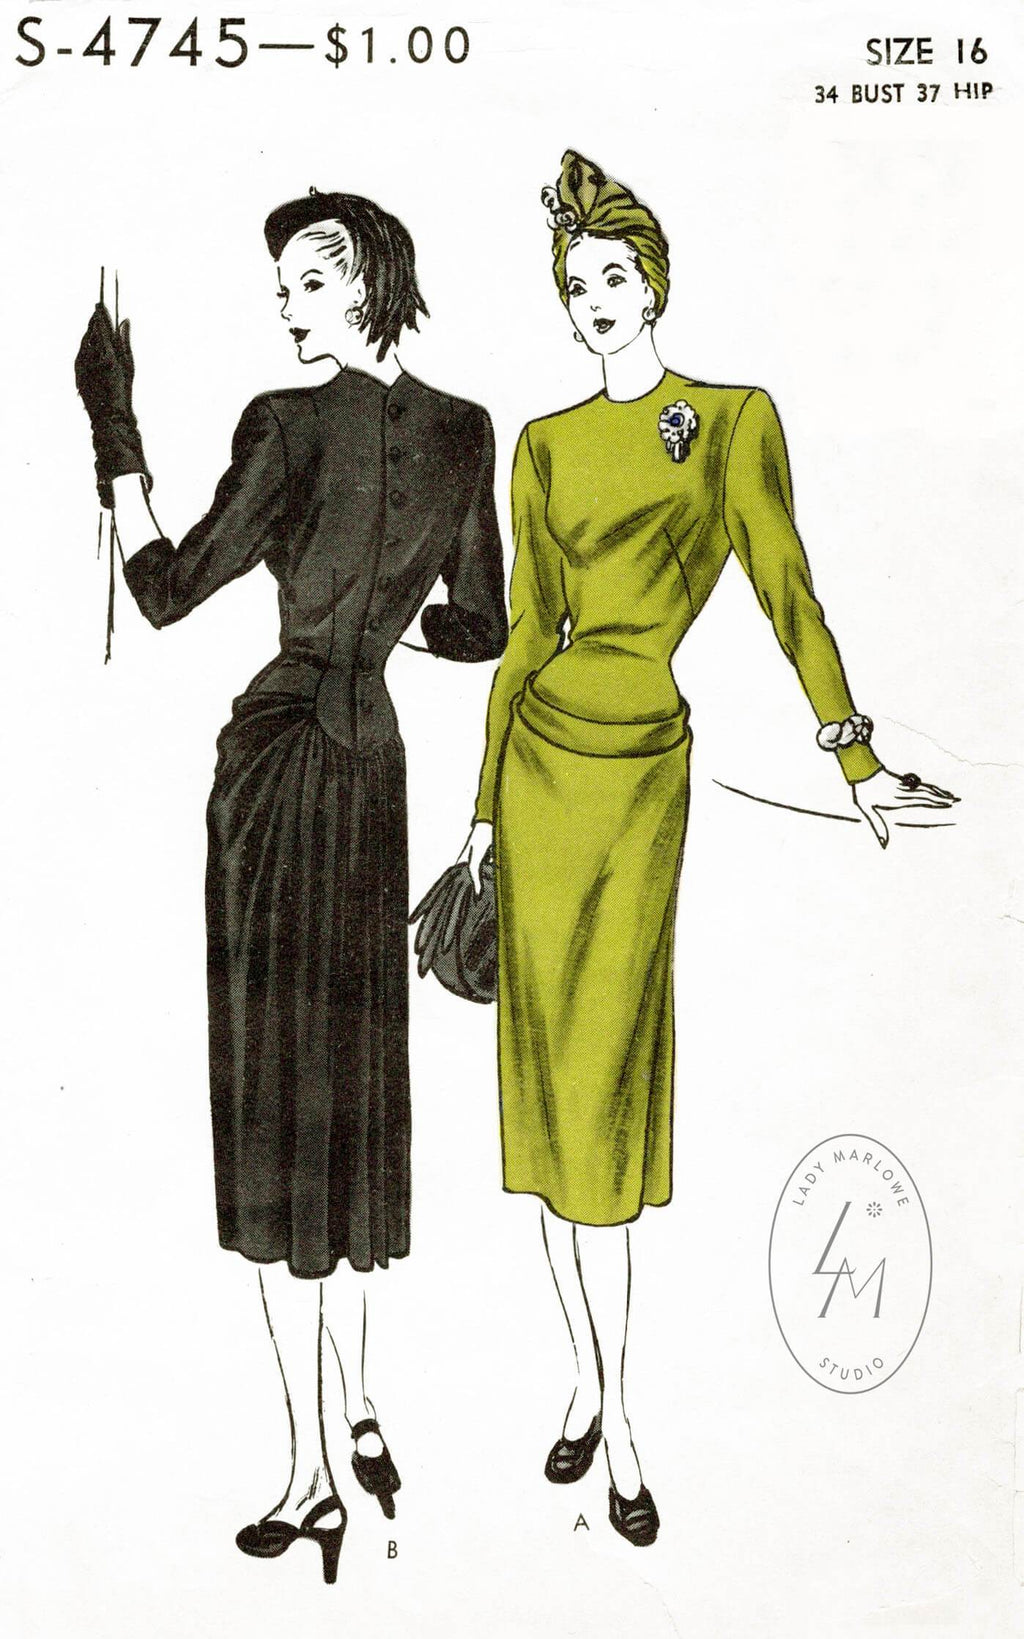 Vogue S-4745 1940s dress vintage sewing pattern reproduction